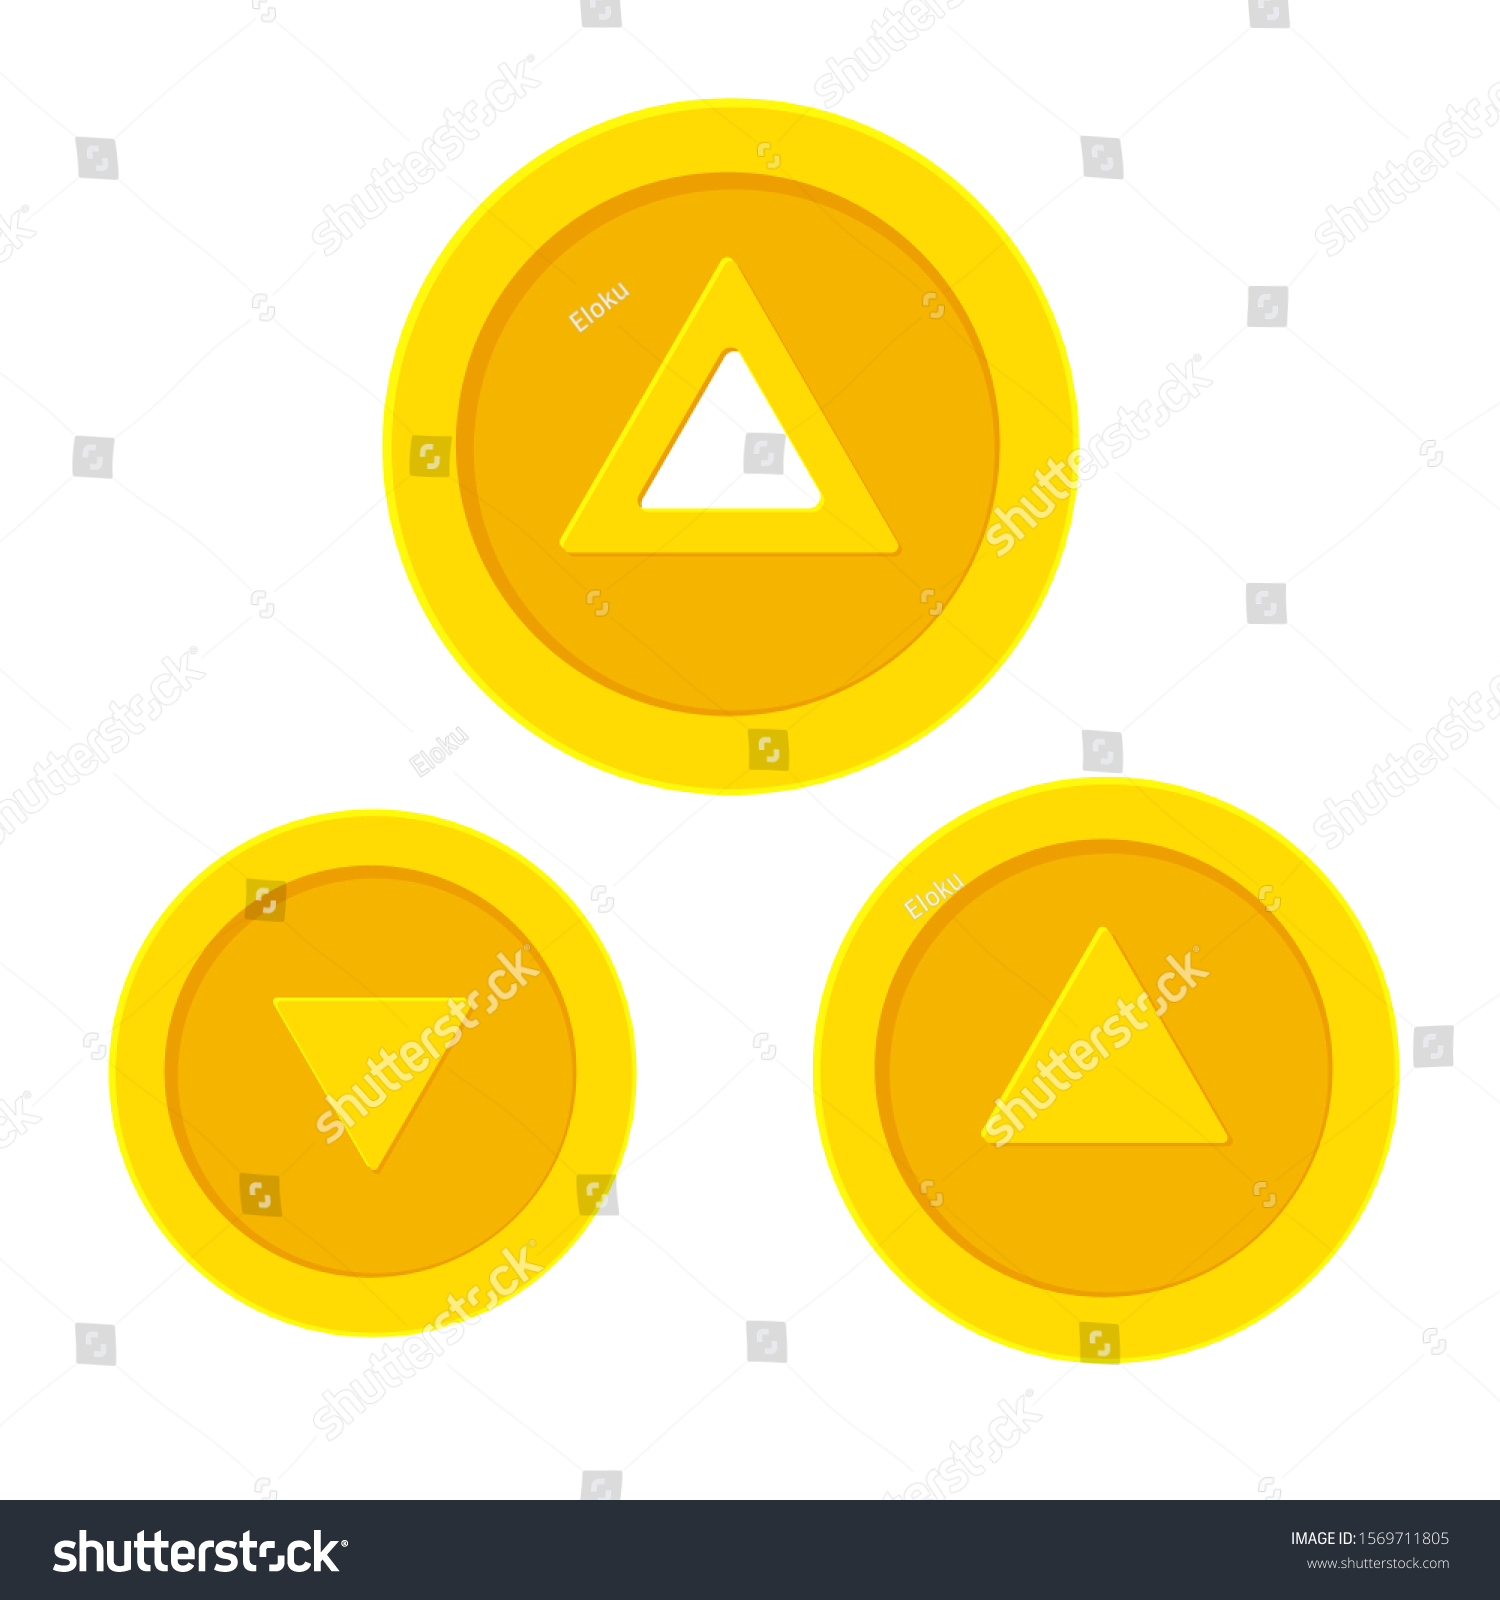 SVG of Triangular hole golden coin. Flat icon isolated on white background. Vector illustration  svg